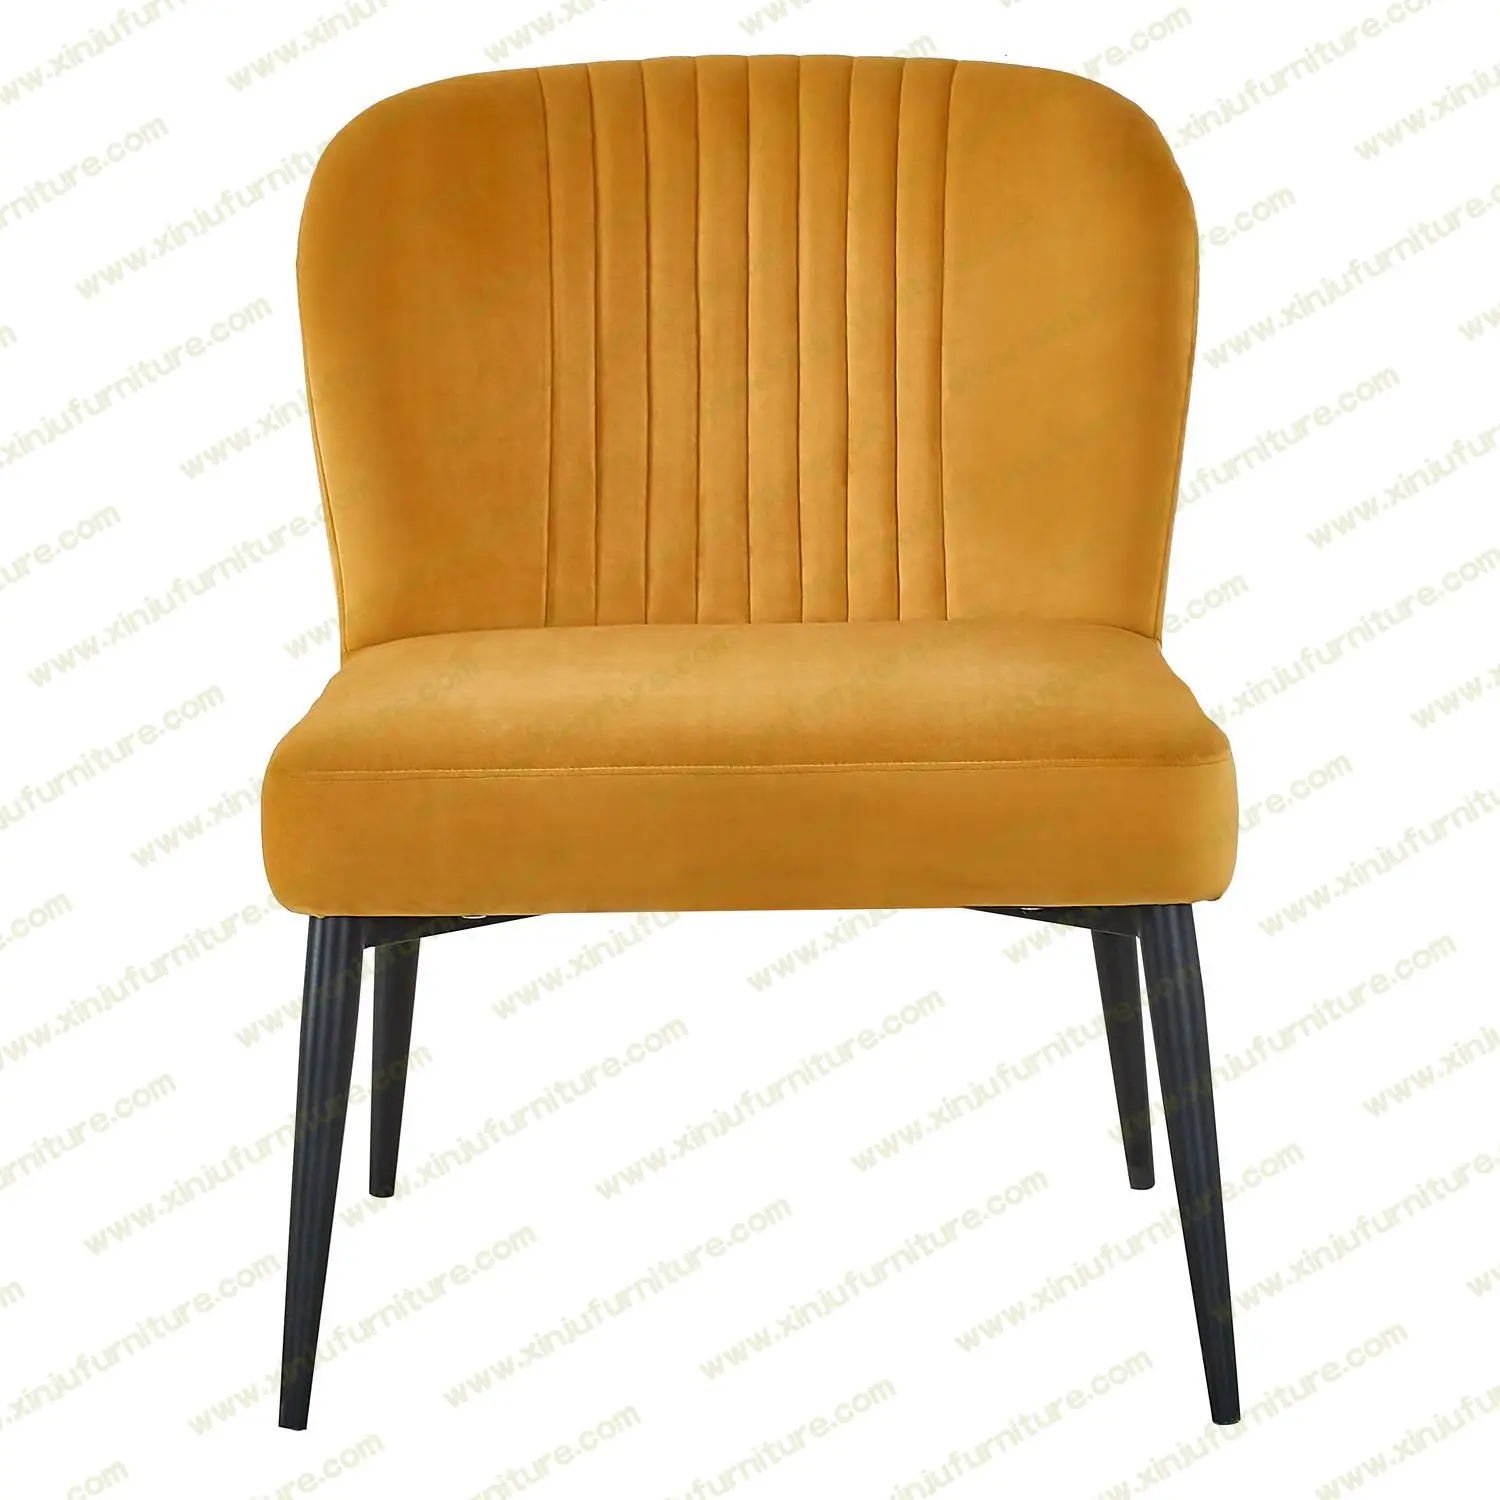 Simple, comfortable and warm sofa chair for living room